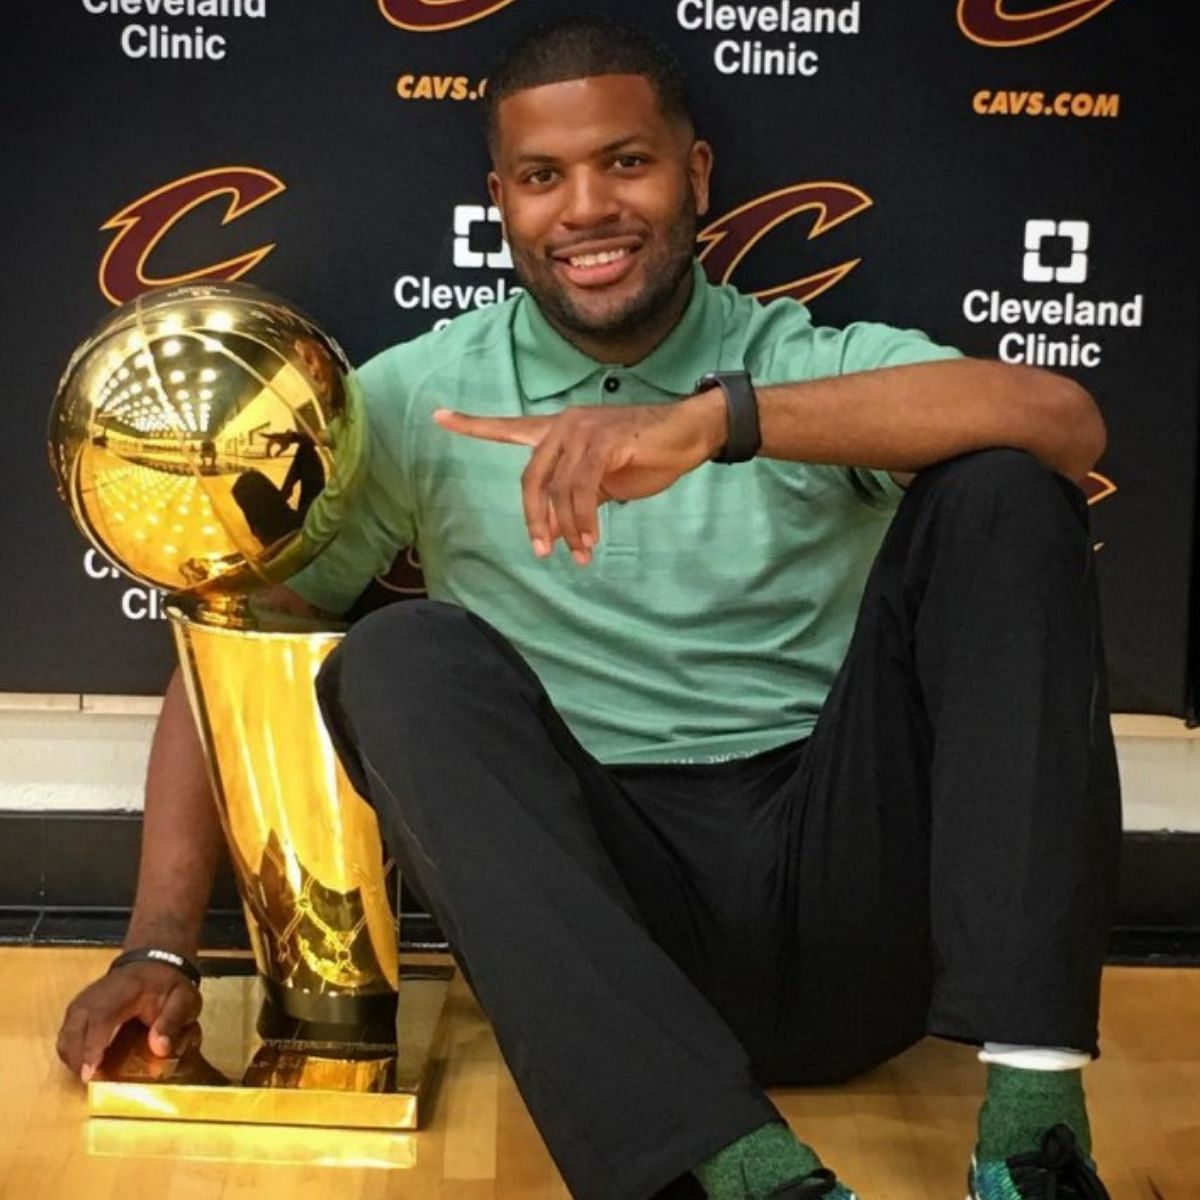 Weems was part of the Cavs title winning team in 2016